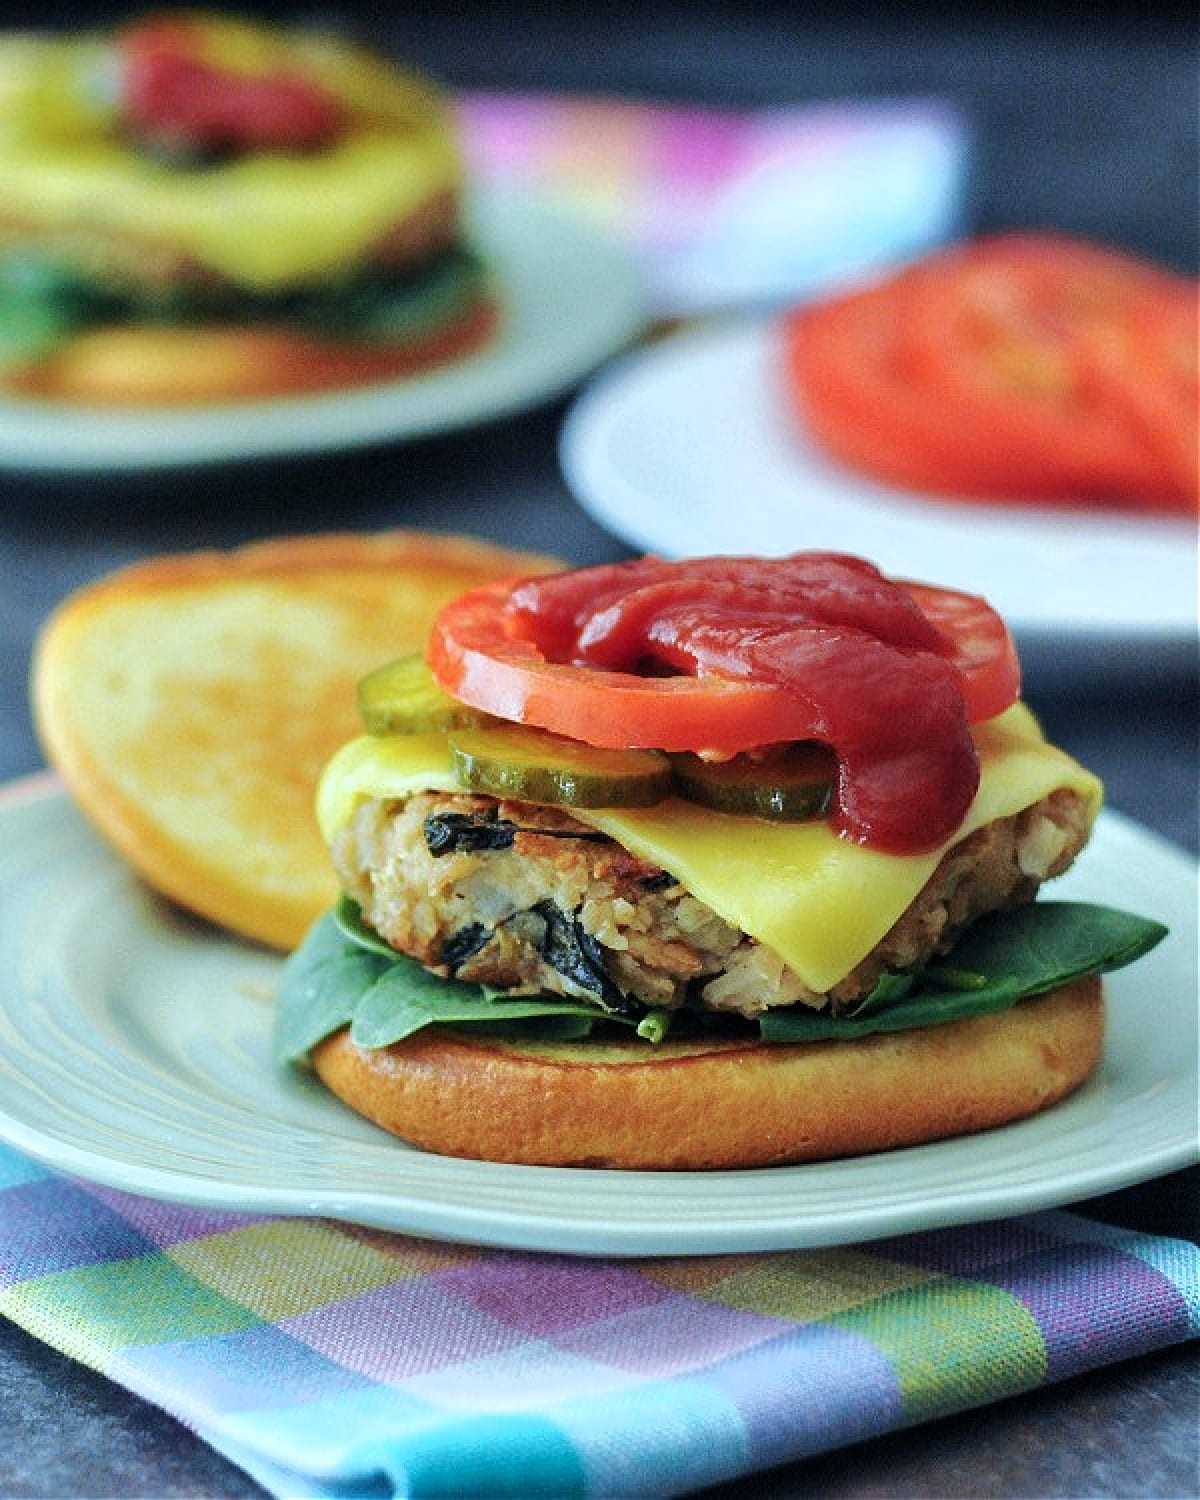 A veggie burger topped with cheese, pickles, tomato slices, and ketchup sits on a light green plate. Another plate of pickles and tomato slices is blurred in background, and the burger plate sits on a pastel plaid cloth napkin.